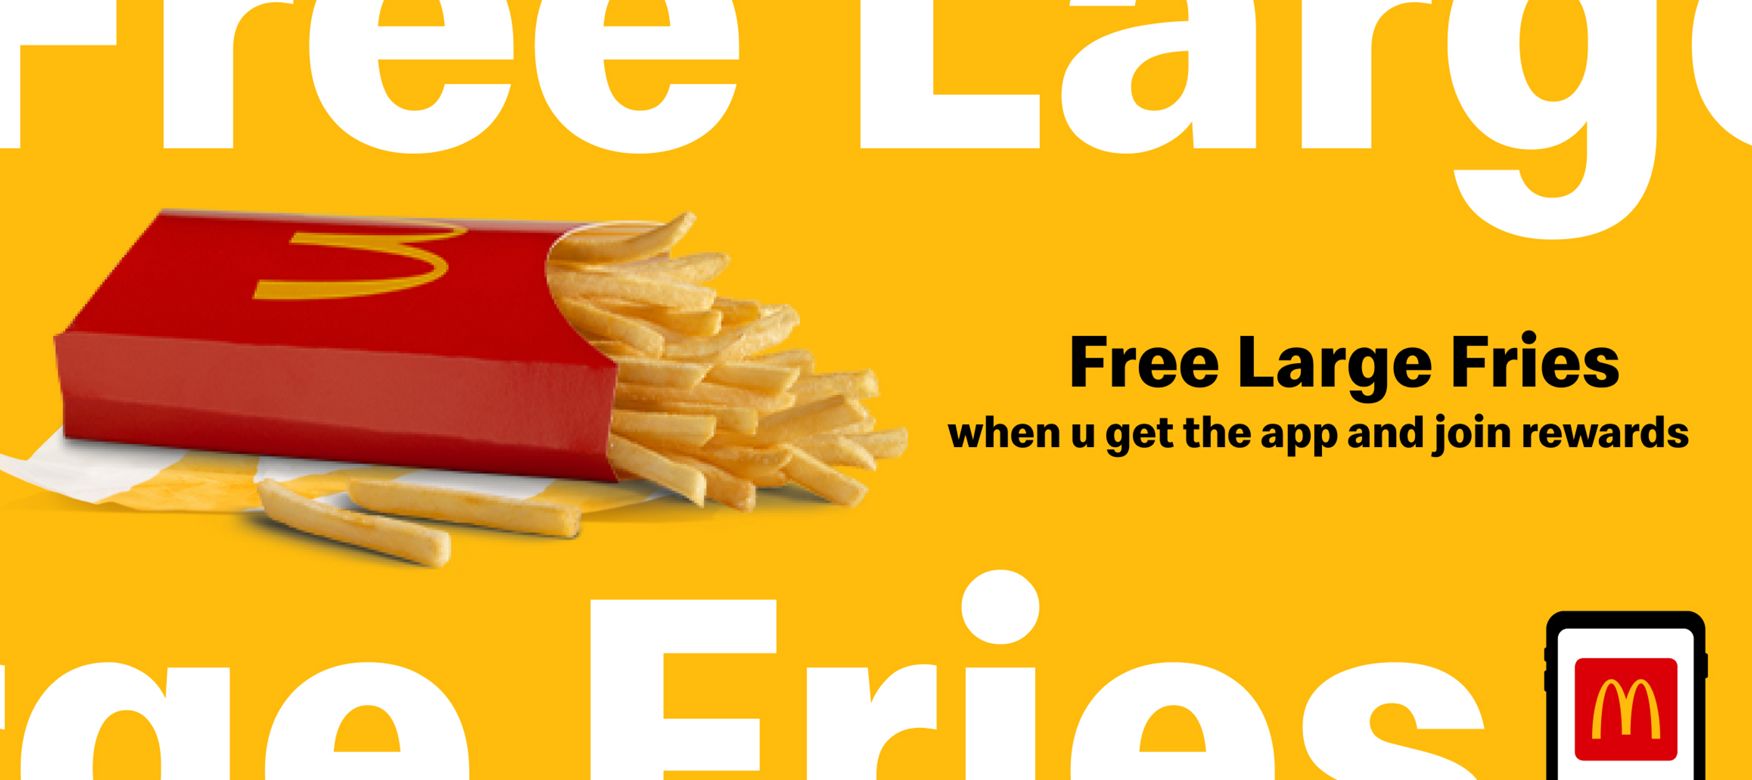 Big Mid-Summer Deals This Week in New Jersey at McDonald's